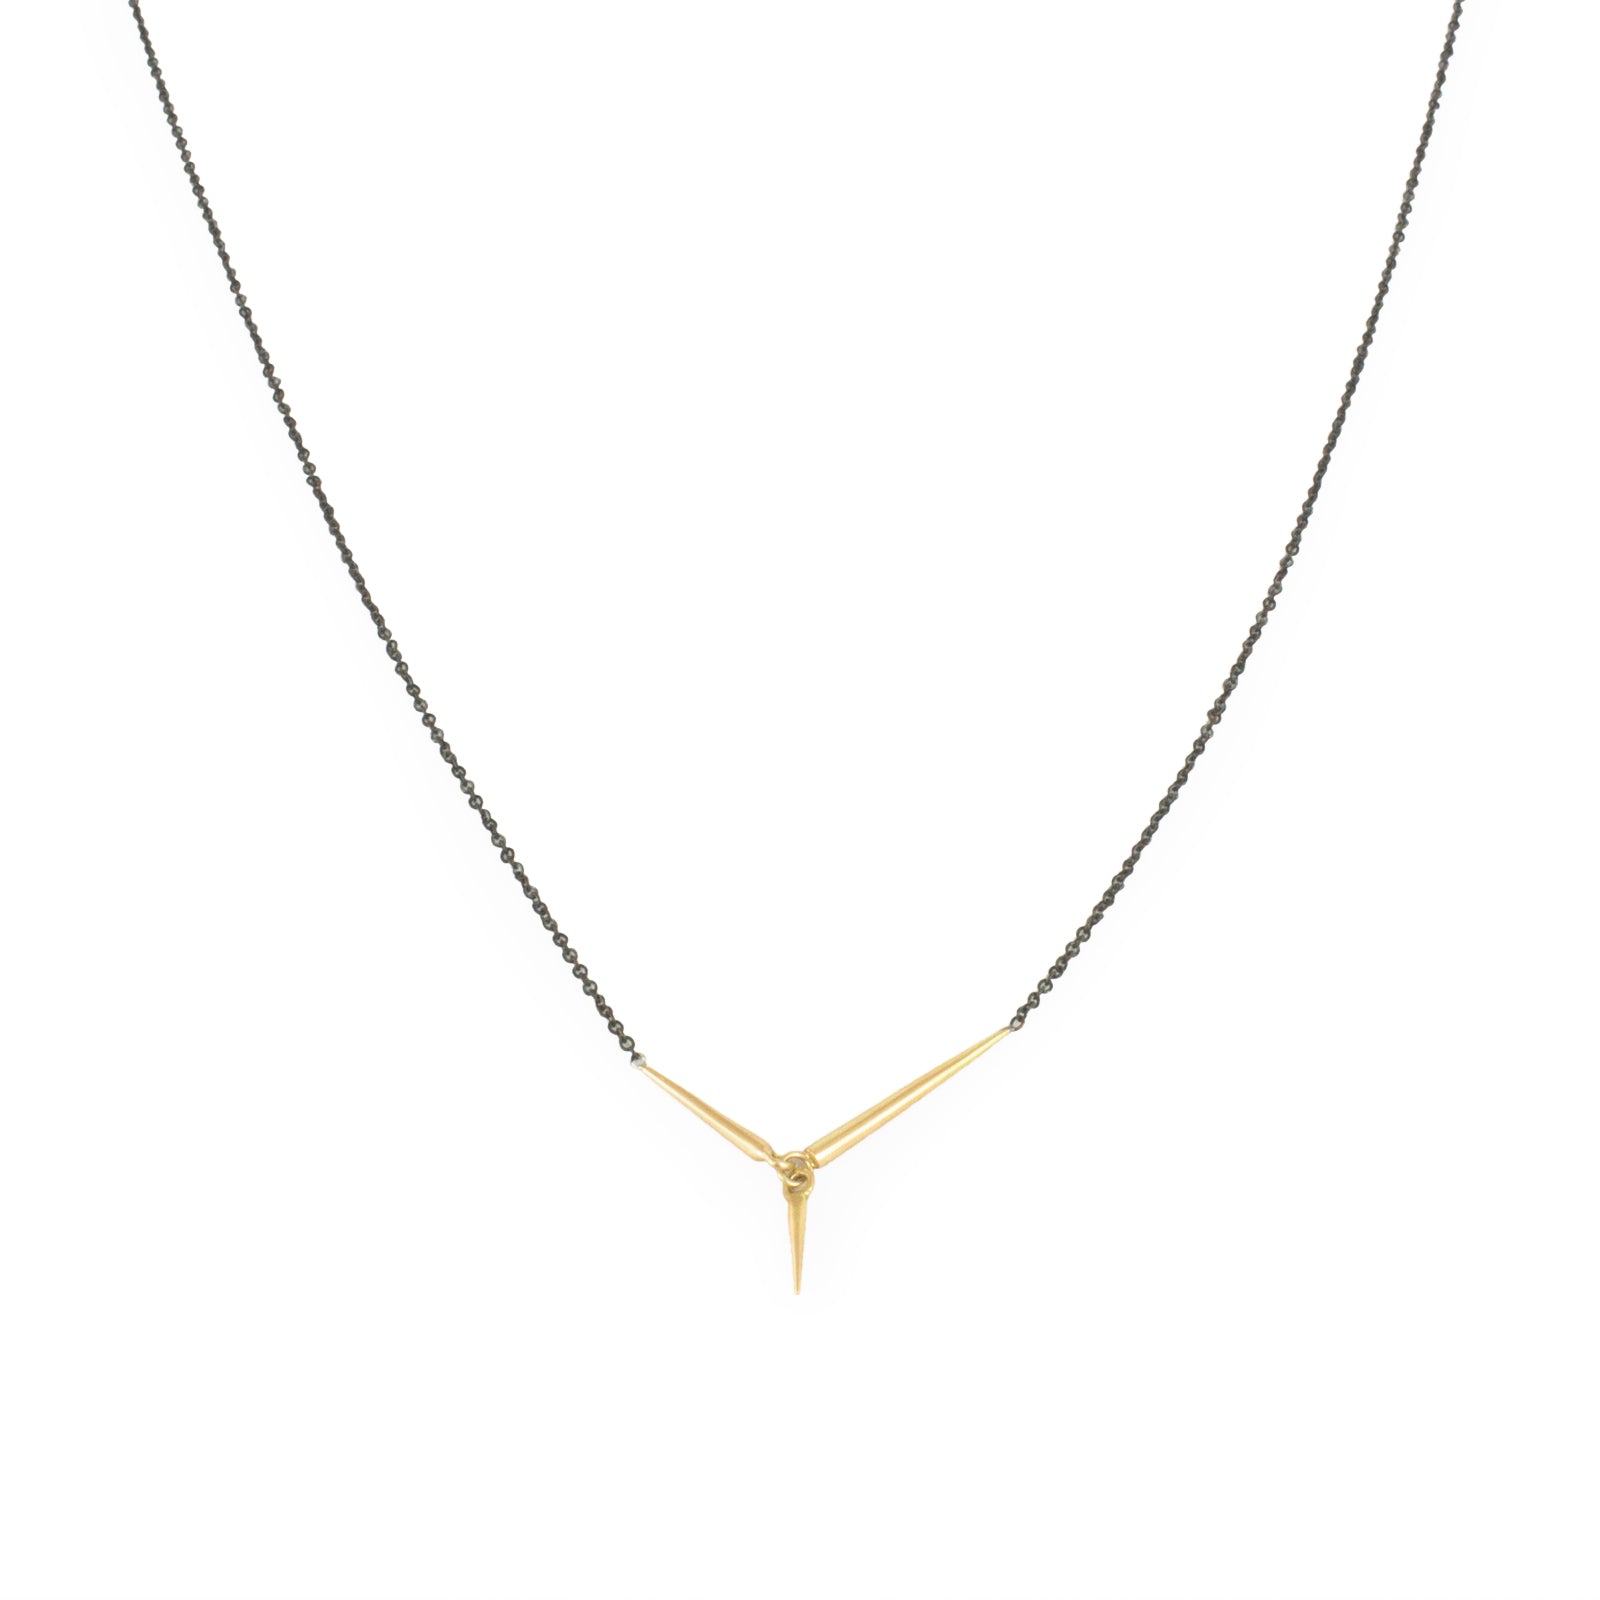 short / 18k yellow gold/oxidized silver chain triad necklace